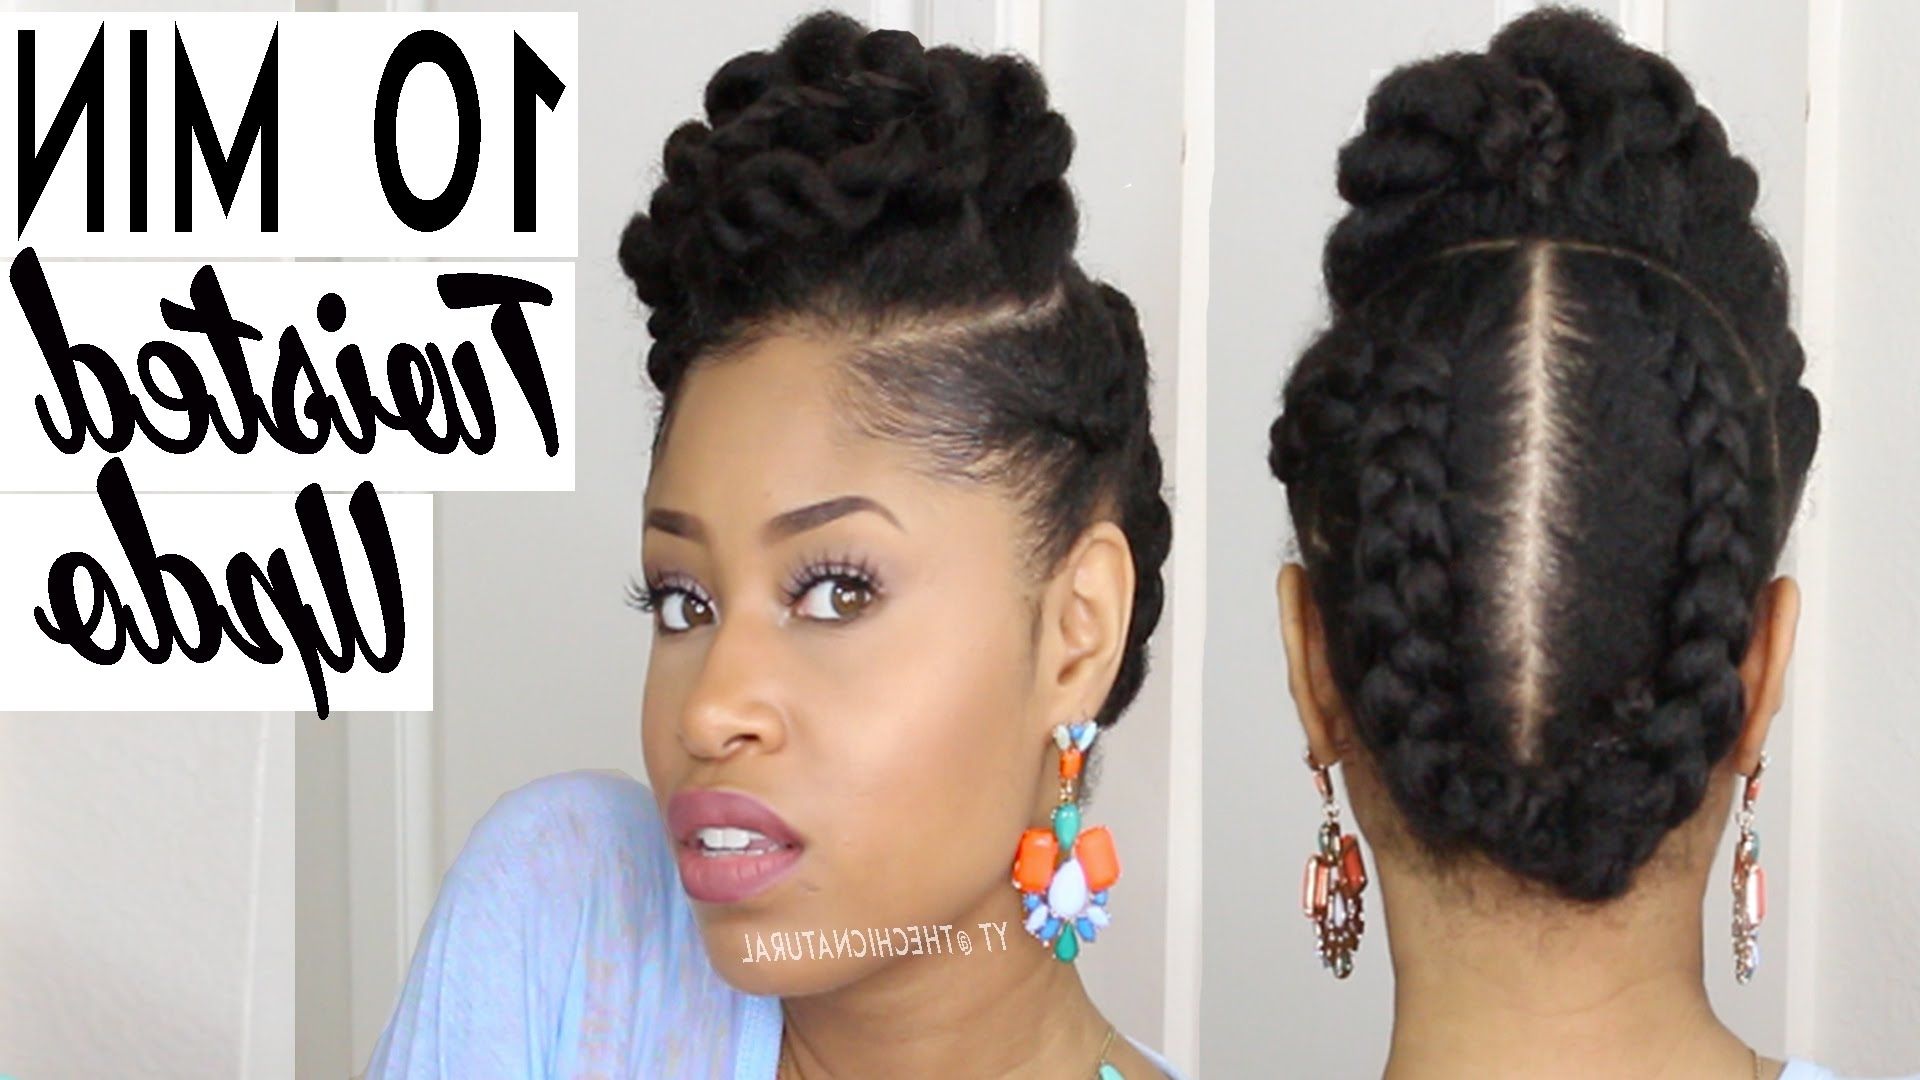 The 10 Minute Twisted Updo | Natural Hairstyle – Youtube Within Black Natural Hair Updo Hairstyles (View 1 of 15)